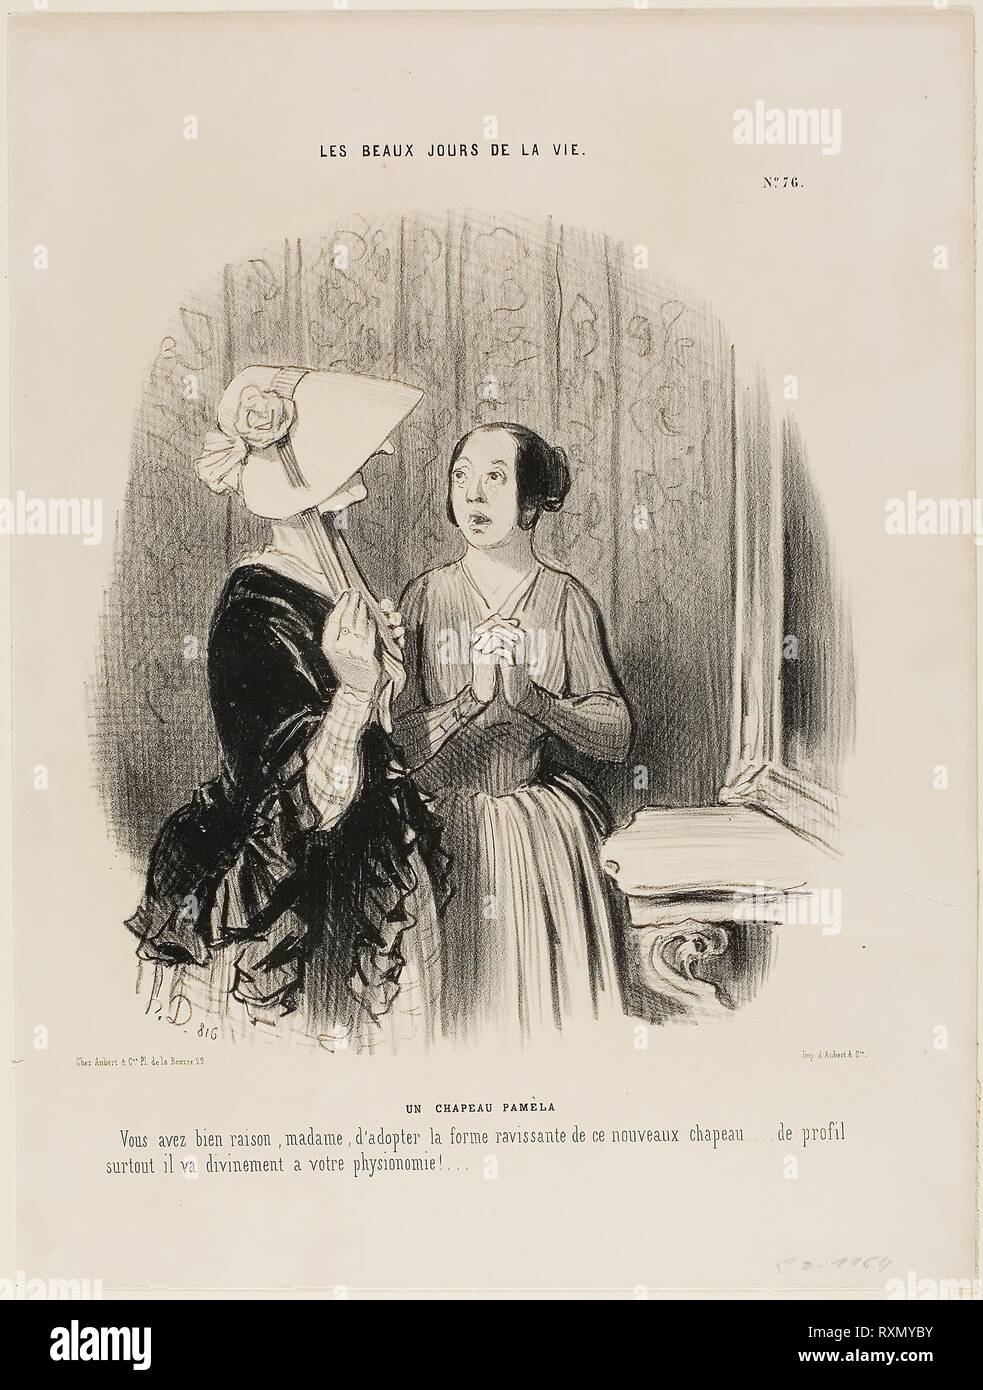 The Pamela Hat. 'You are perfectly right Madame to adopt this ravishing form of a new hat...... especially from the side it matches beautifully your physiognomy.....!,'plate 76 from Les Beaux Jours De La Vie. Honoré Victorin Daumier; French, 1808-1879. Date: 1845. Dimensions: 235 × 214 mm (image); 352 × 265 mm (sheet). Lithograph in black on ivory wove paper. Origin: France. Museum: The Chicago Art Institute. Stock Photo